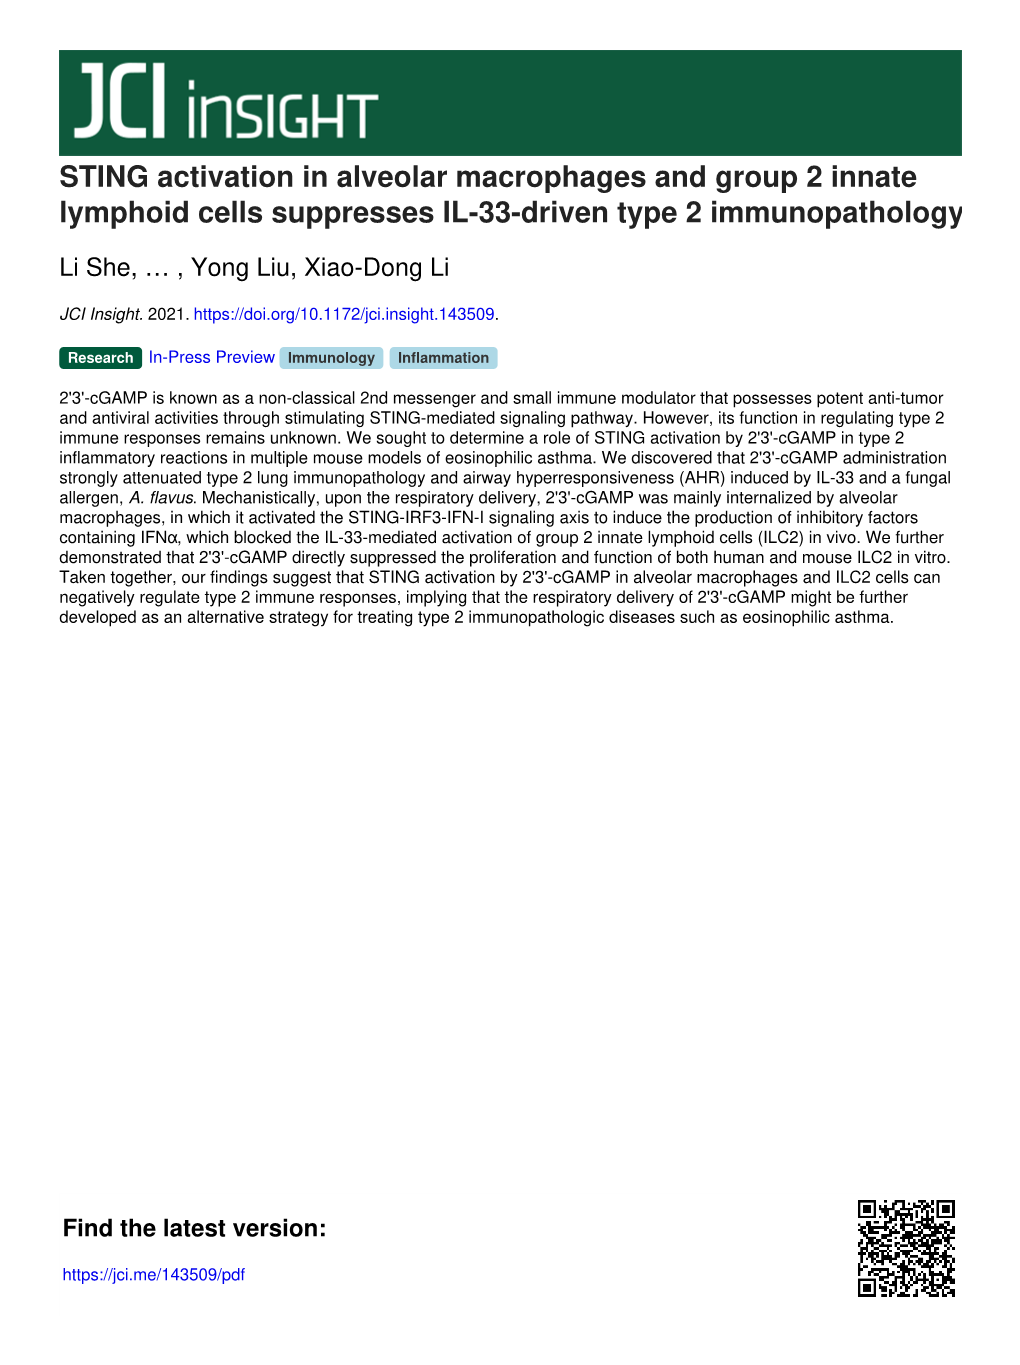 STING Activation in Alveolar Macrophages and Group 2 Innate Lymphoid Cells Suppresses IL-33-Driven Type 2 Immunopathology